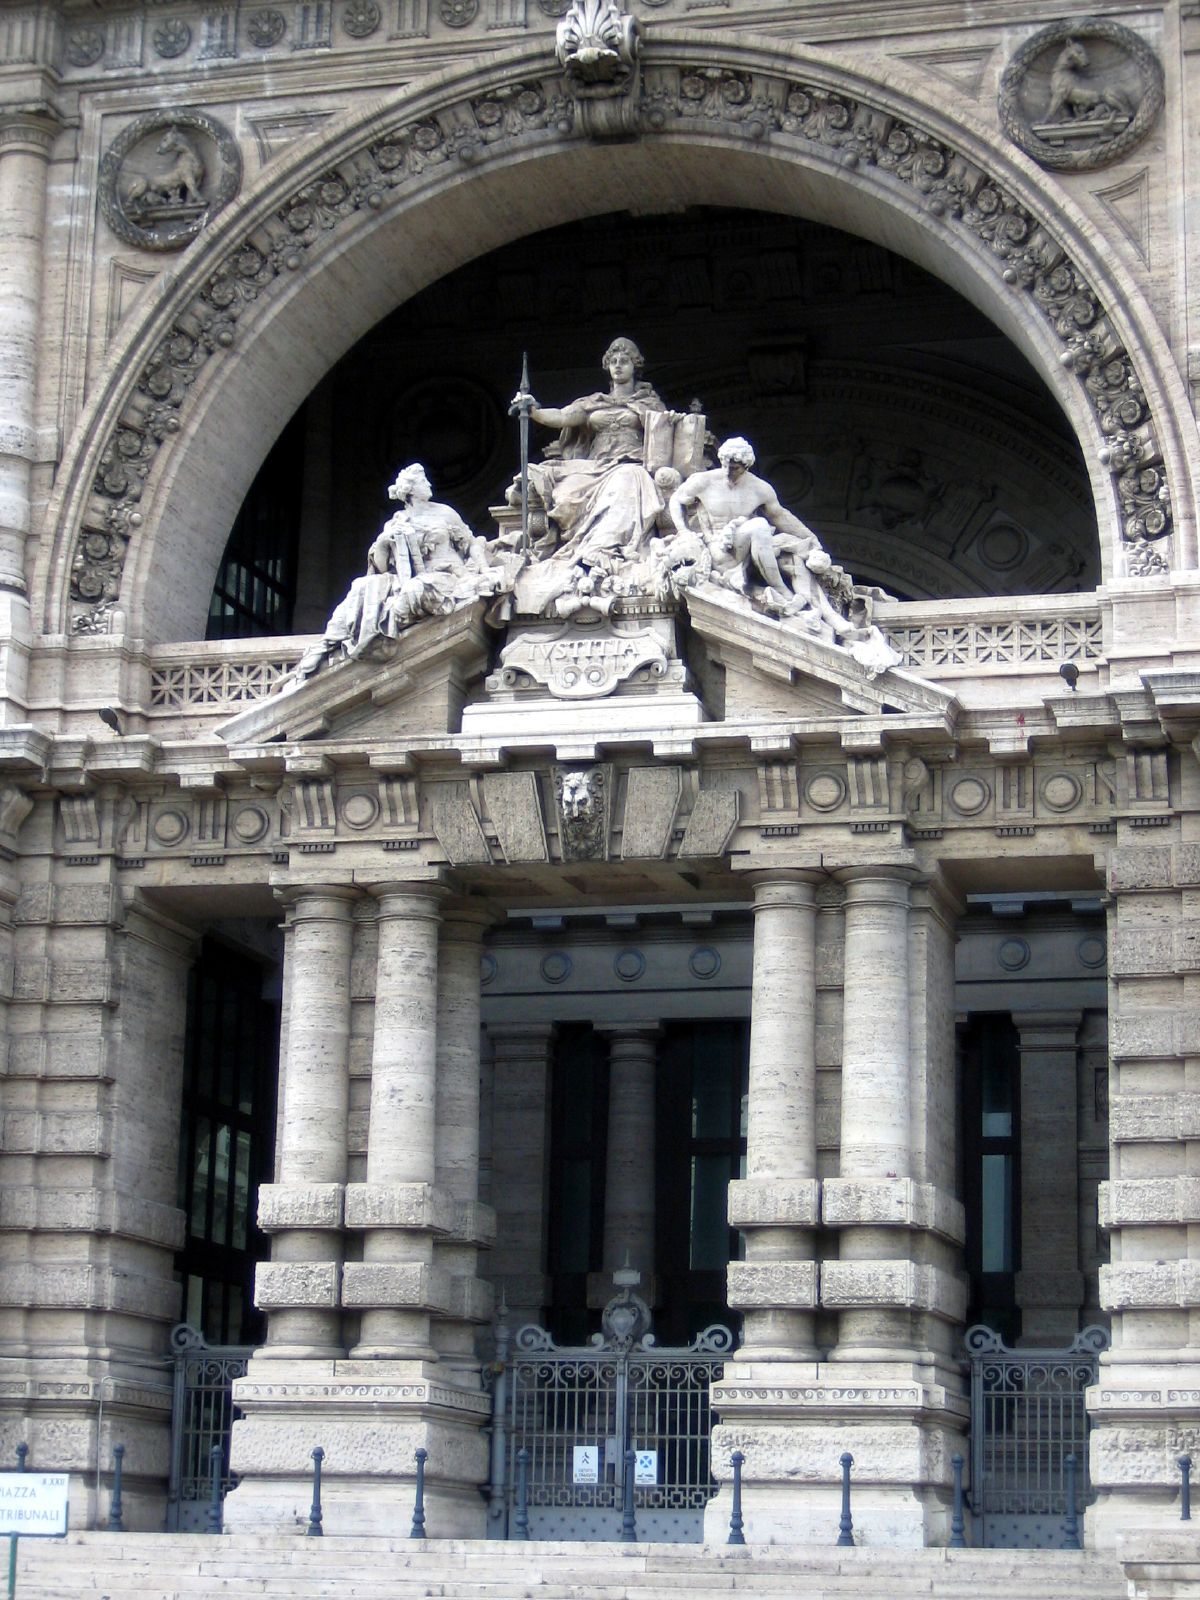 a large building with some statues on the front